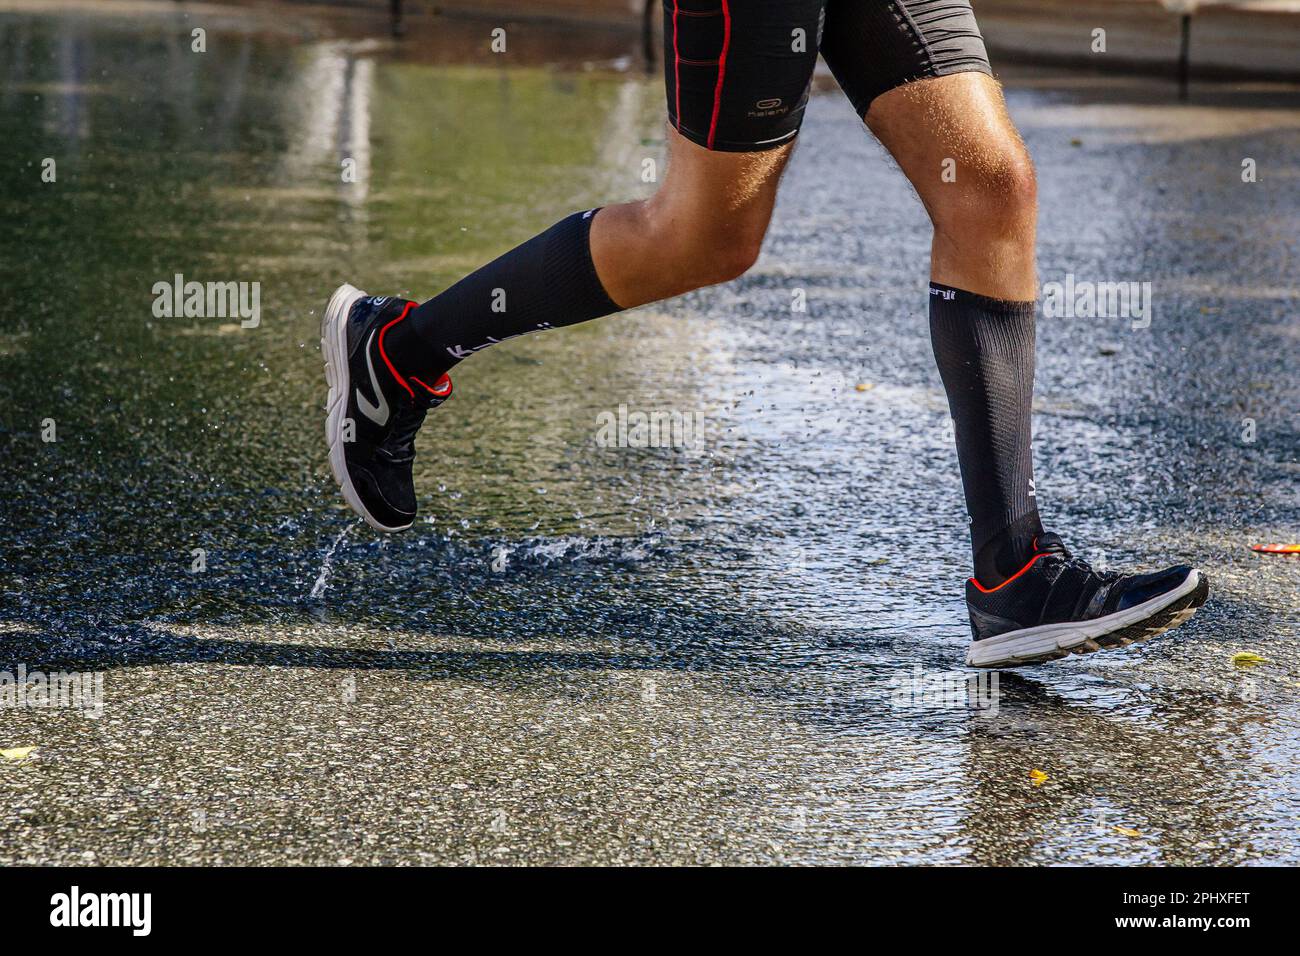 male runner irunning on water road in city marathon race, shoes